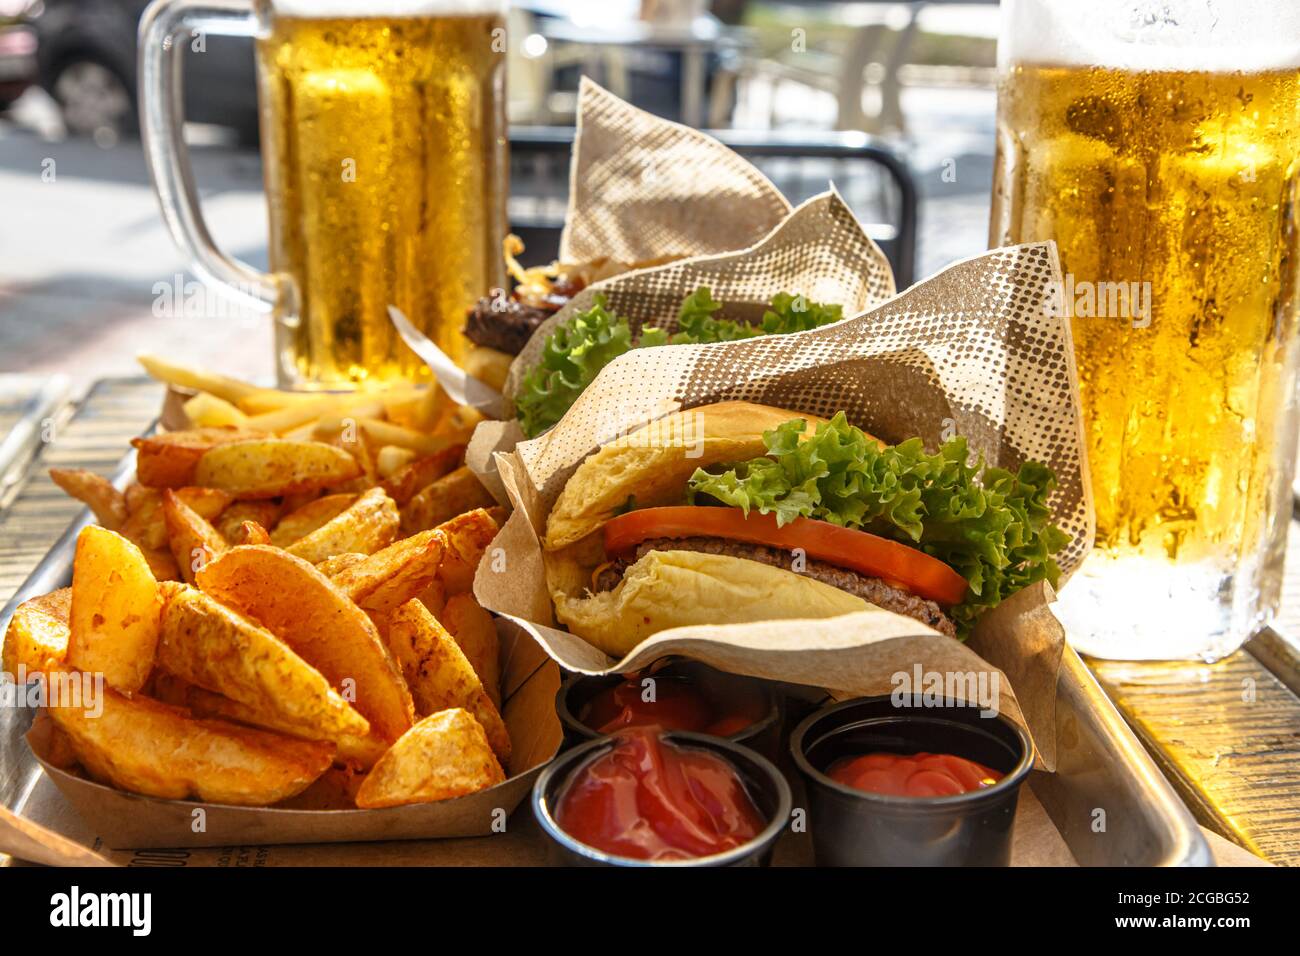 Burgers, potatoes, ketchup and mugs of beer on the table of a street cafe. Stock Photo